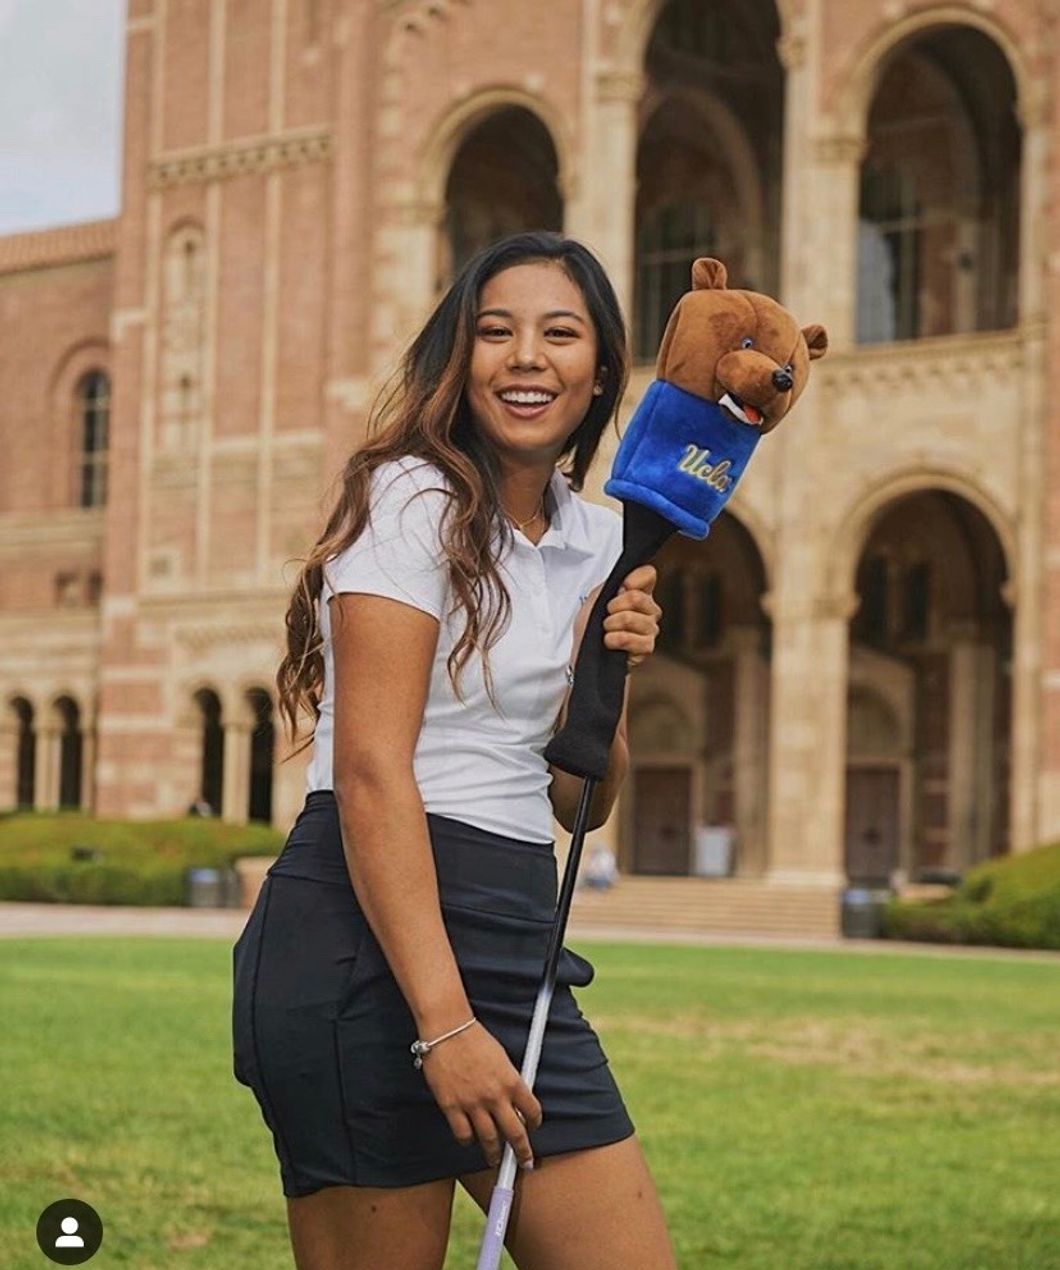 The Double Life Of A Student-Athlete—As Told By LPGA Hopeful, Patty Tavatanakit